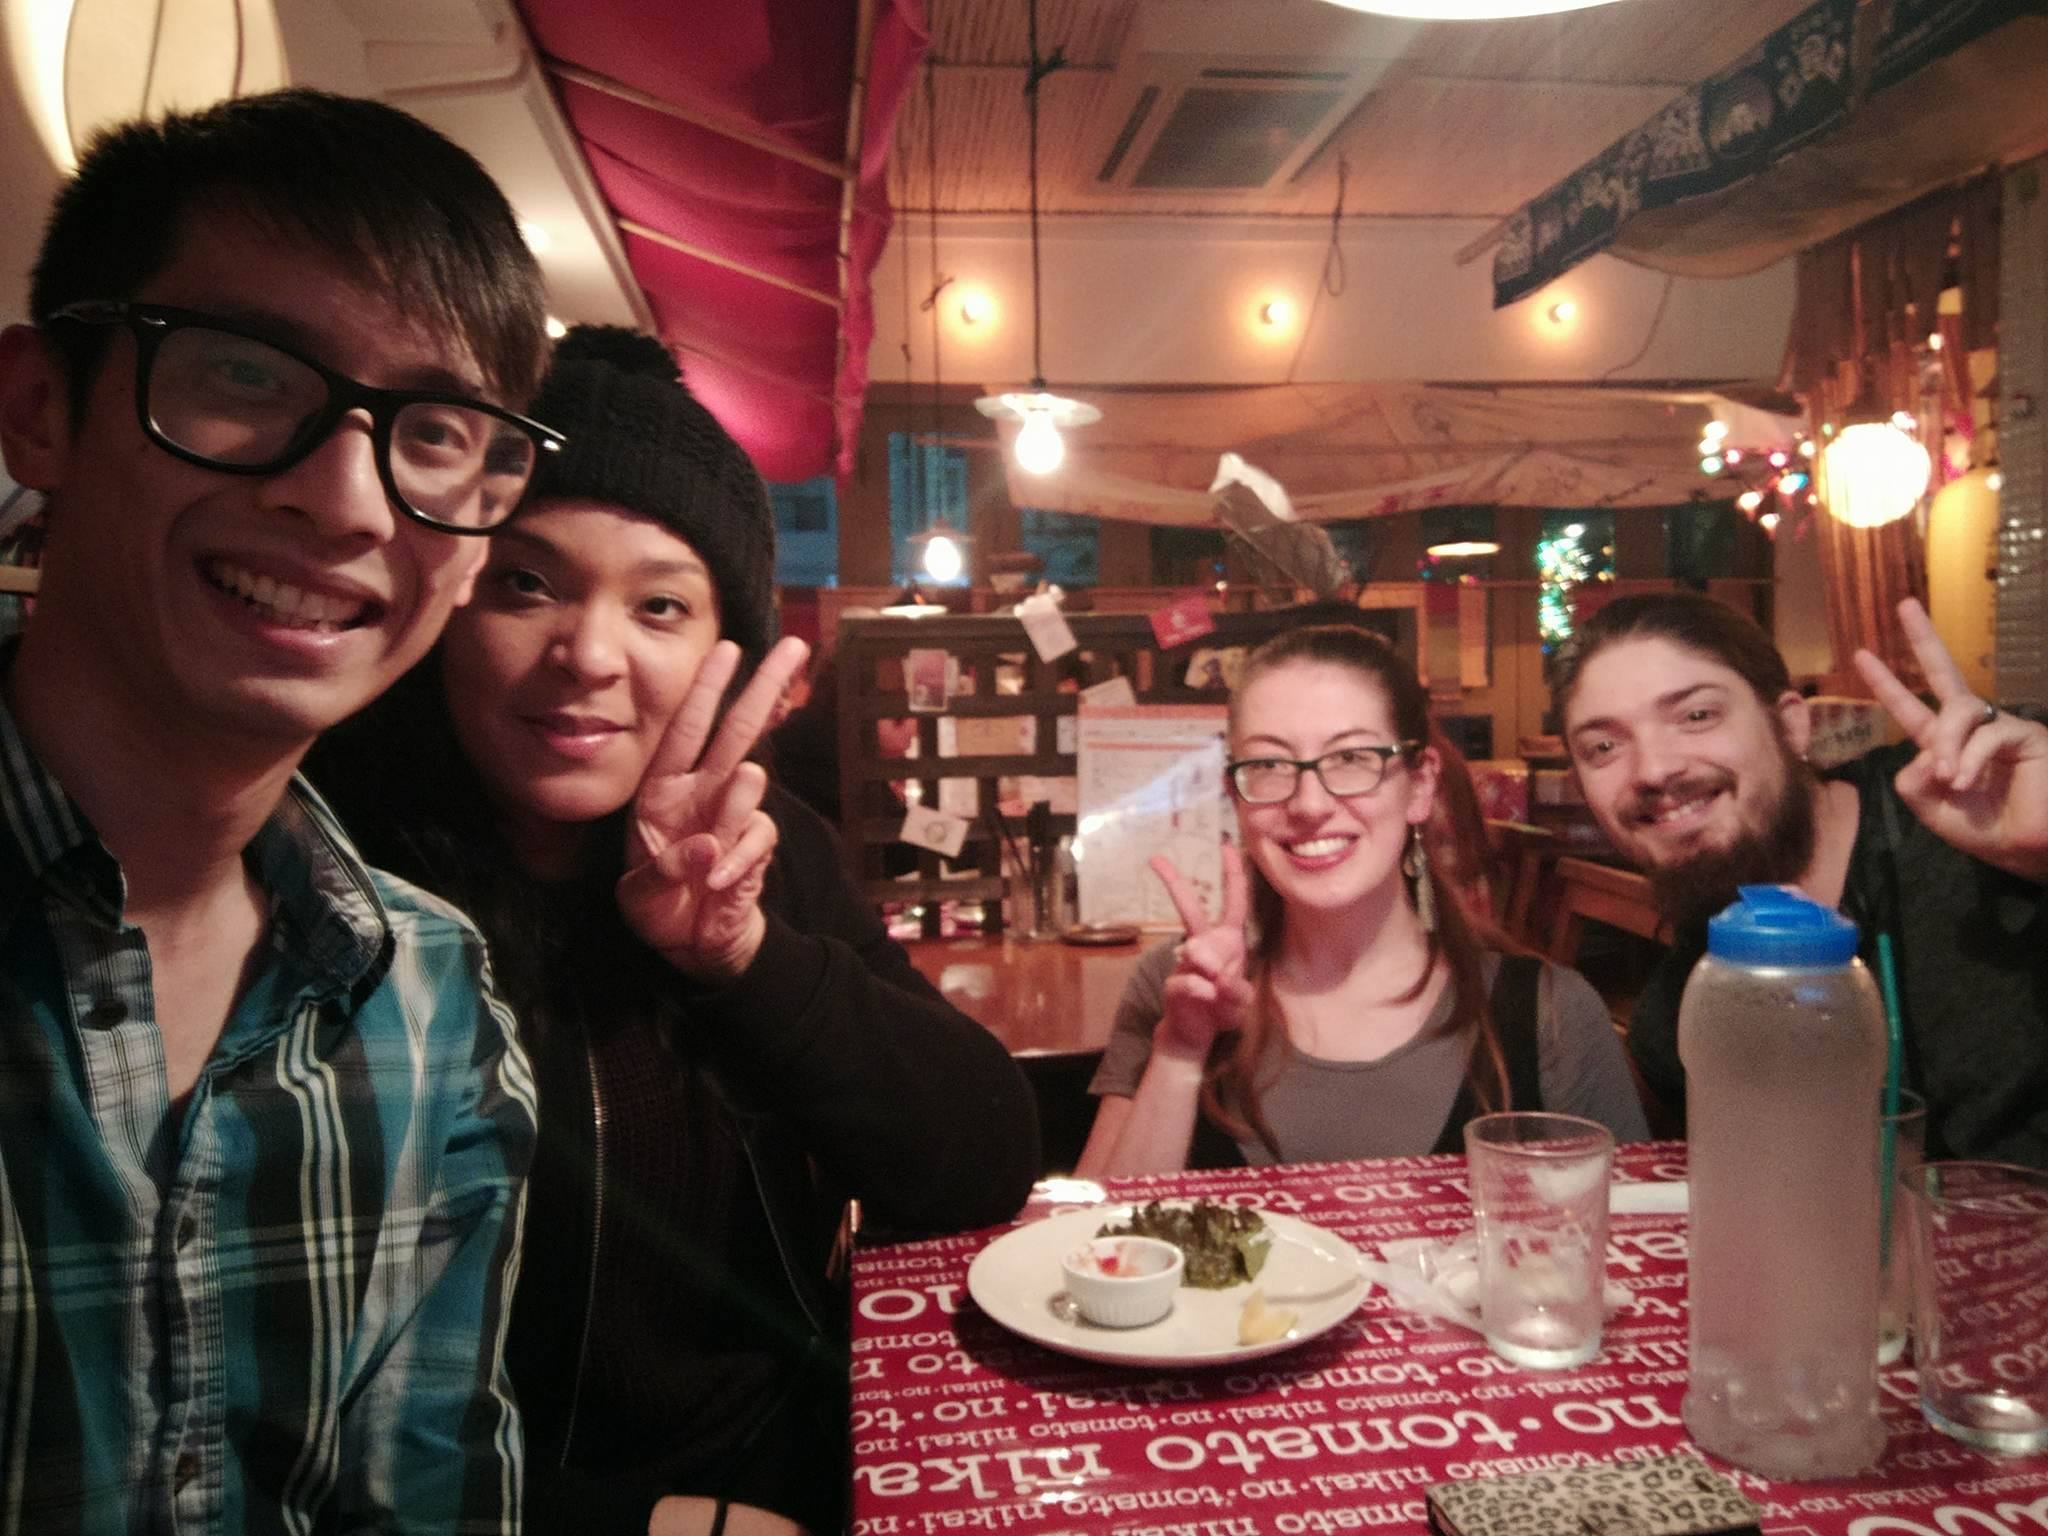 We got to see Joel again!! It was so great to eat at the "Green Curry Place" again with you!